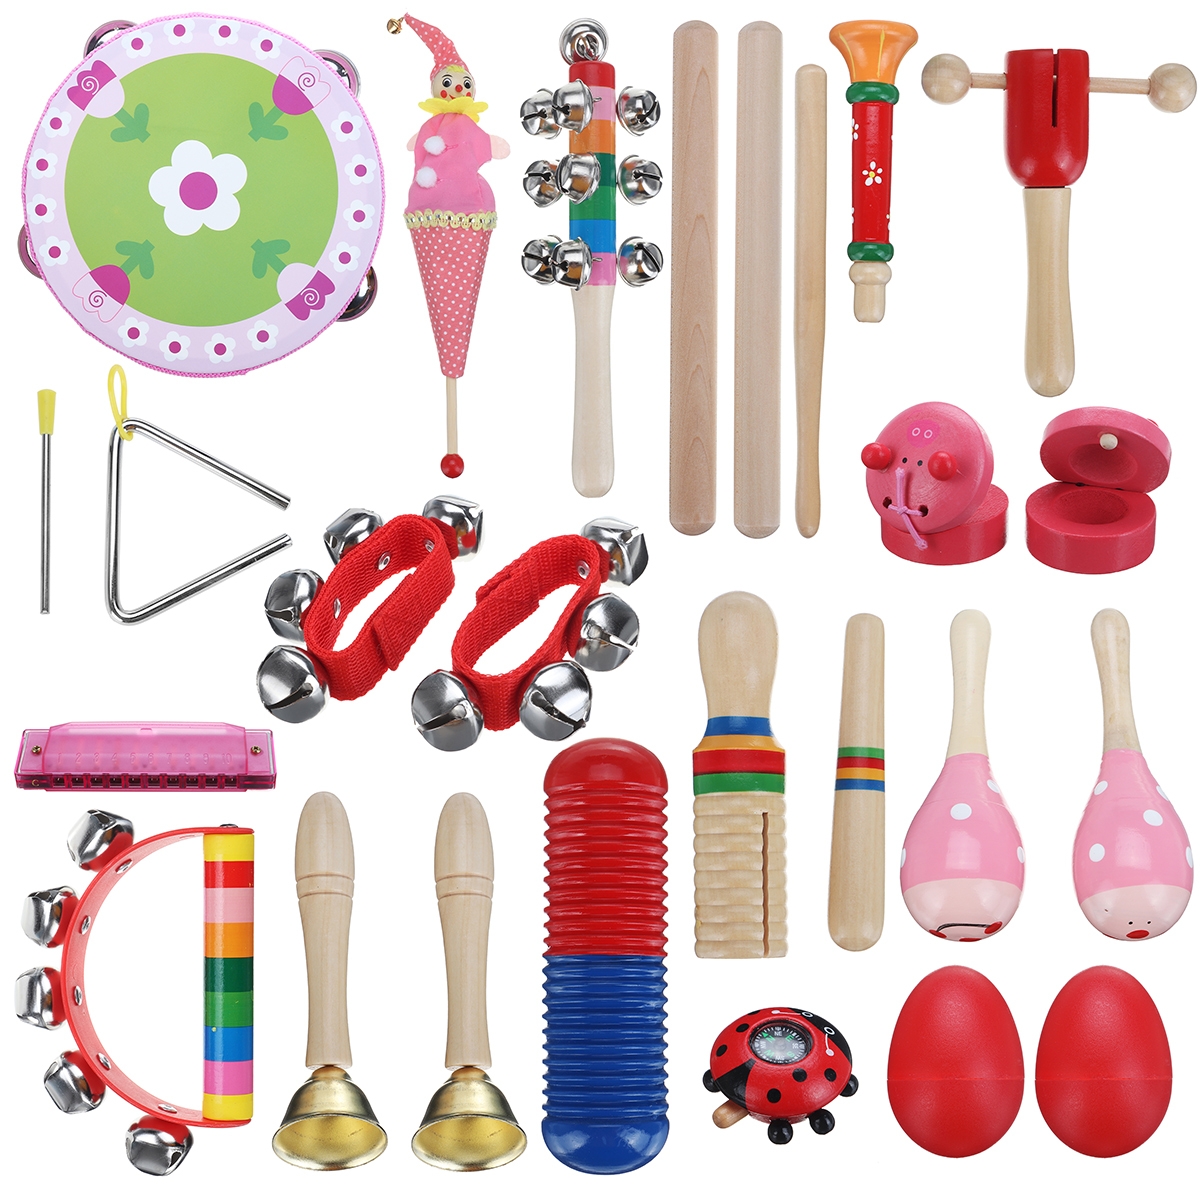 22 Pieces Set Orff Musical Instruments Hand Percussion Musical Toy for Kids Music Learning/KTV Party Playing